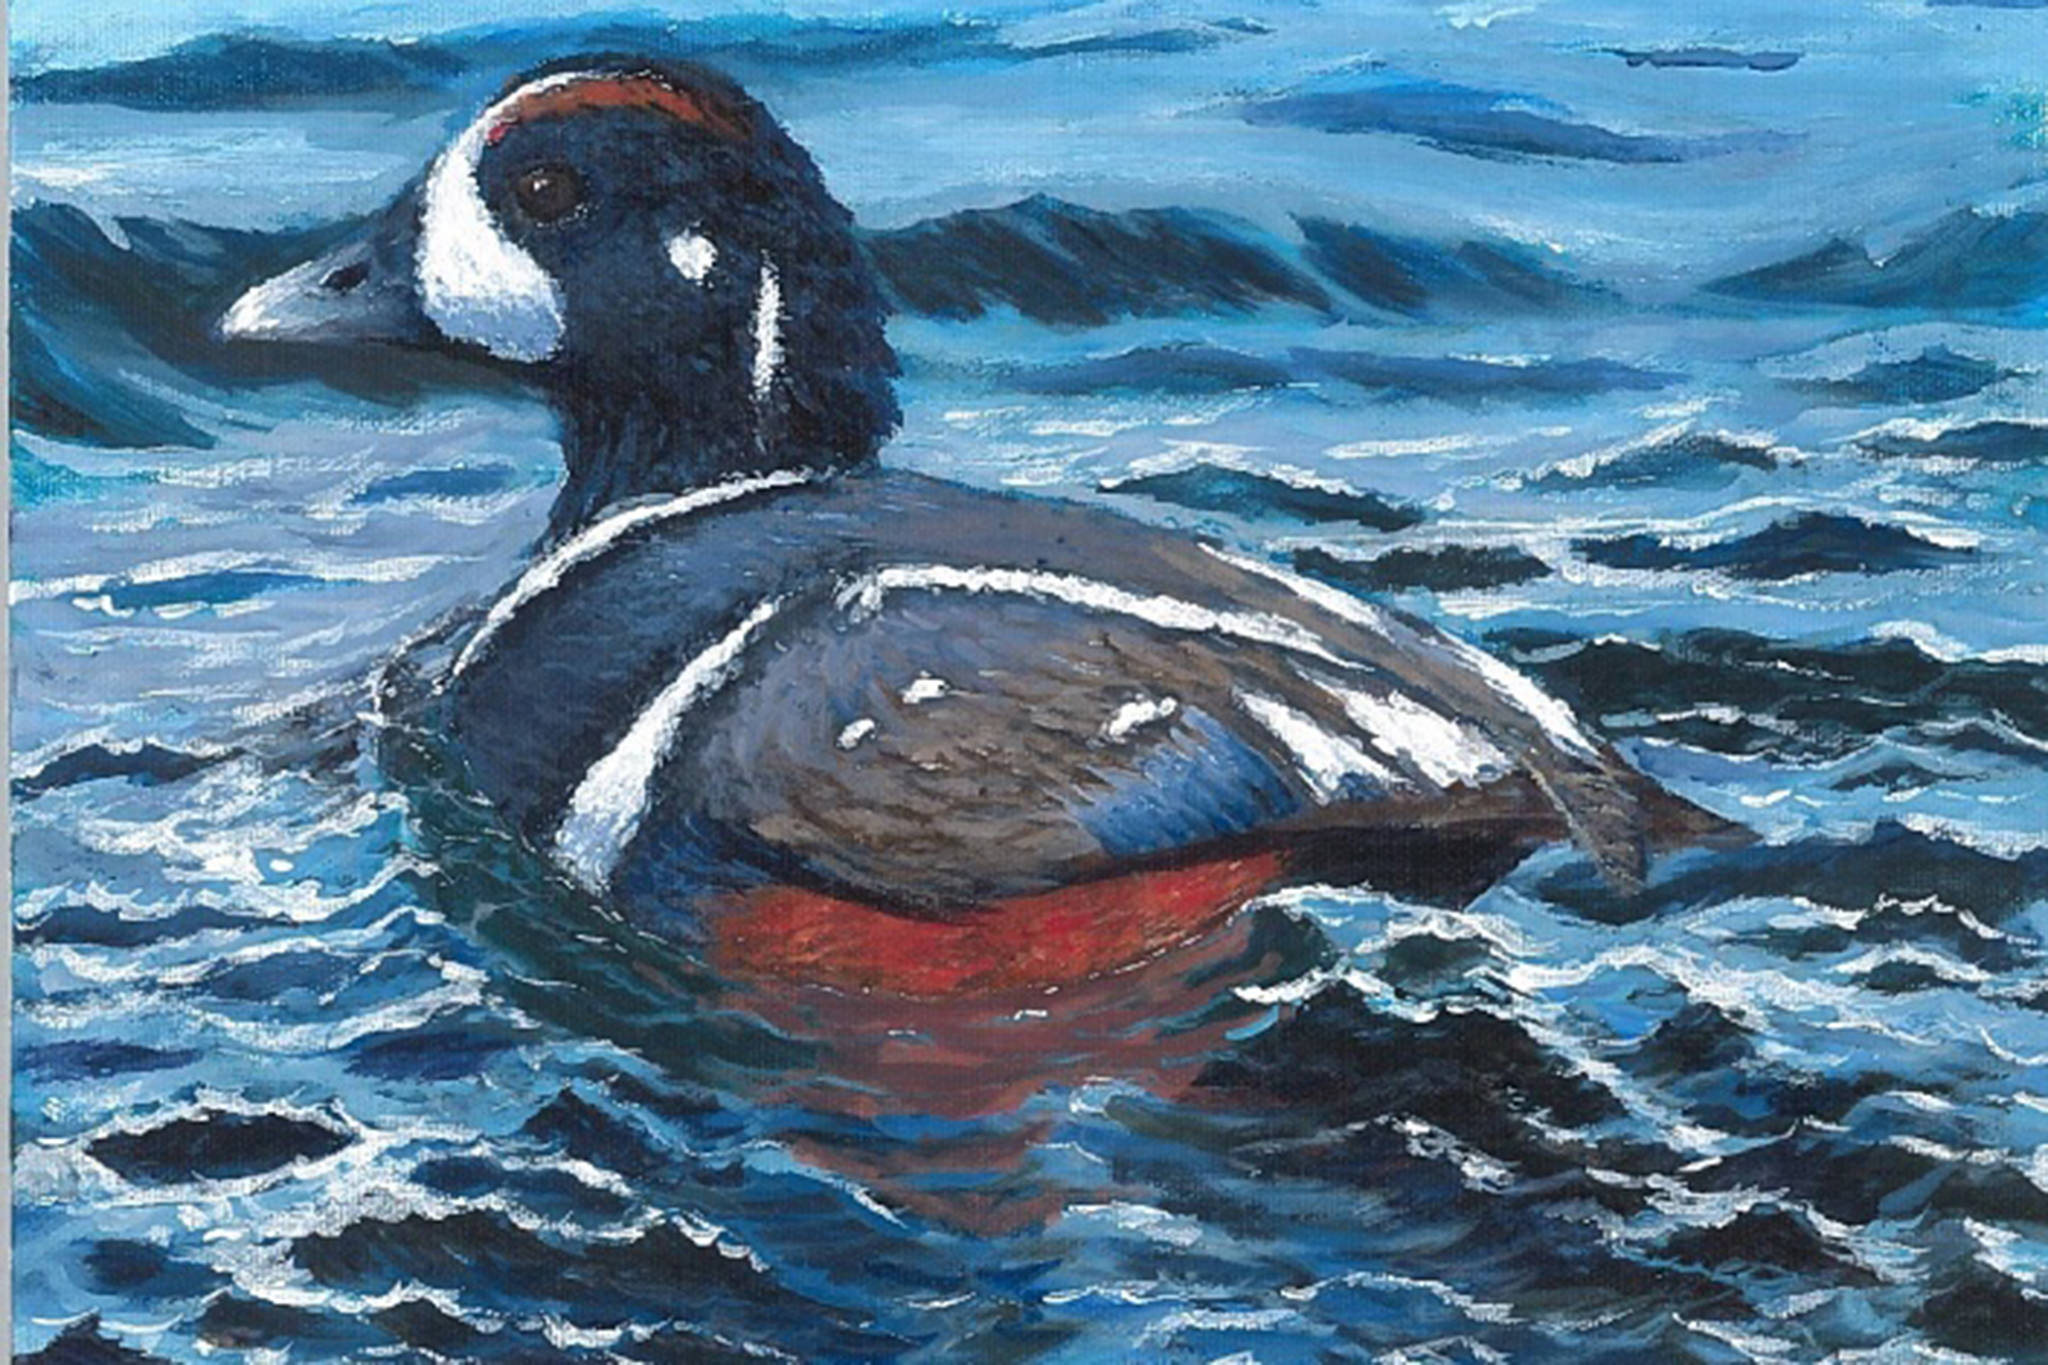 Thunder Mountain students win duck stamp awards